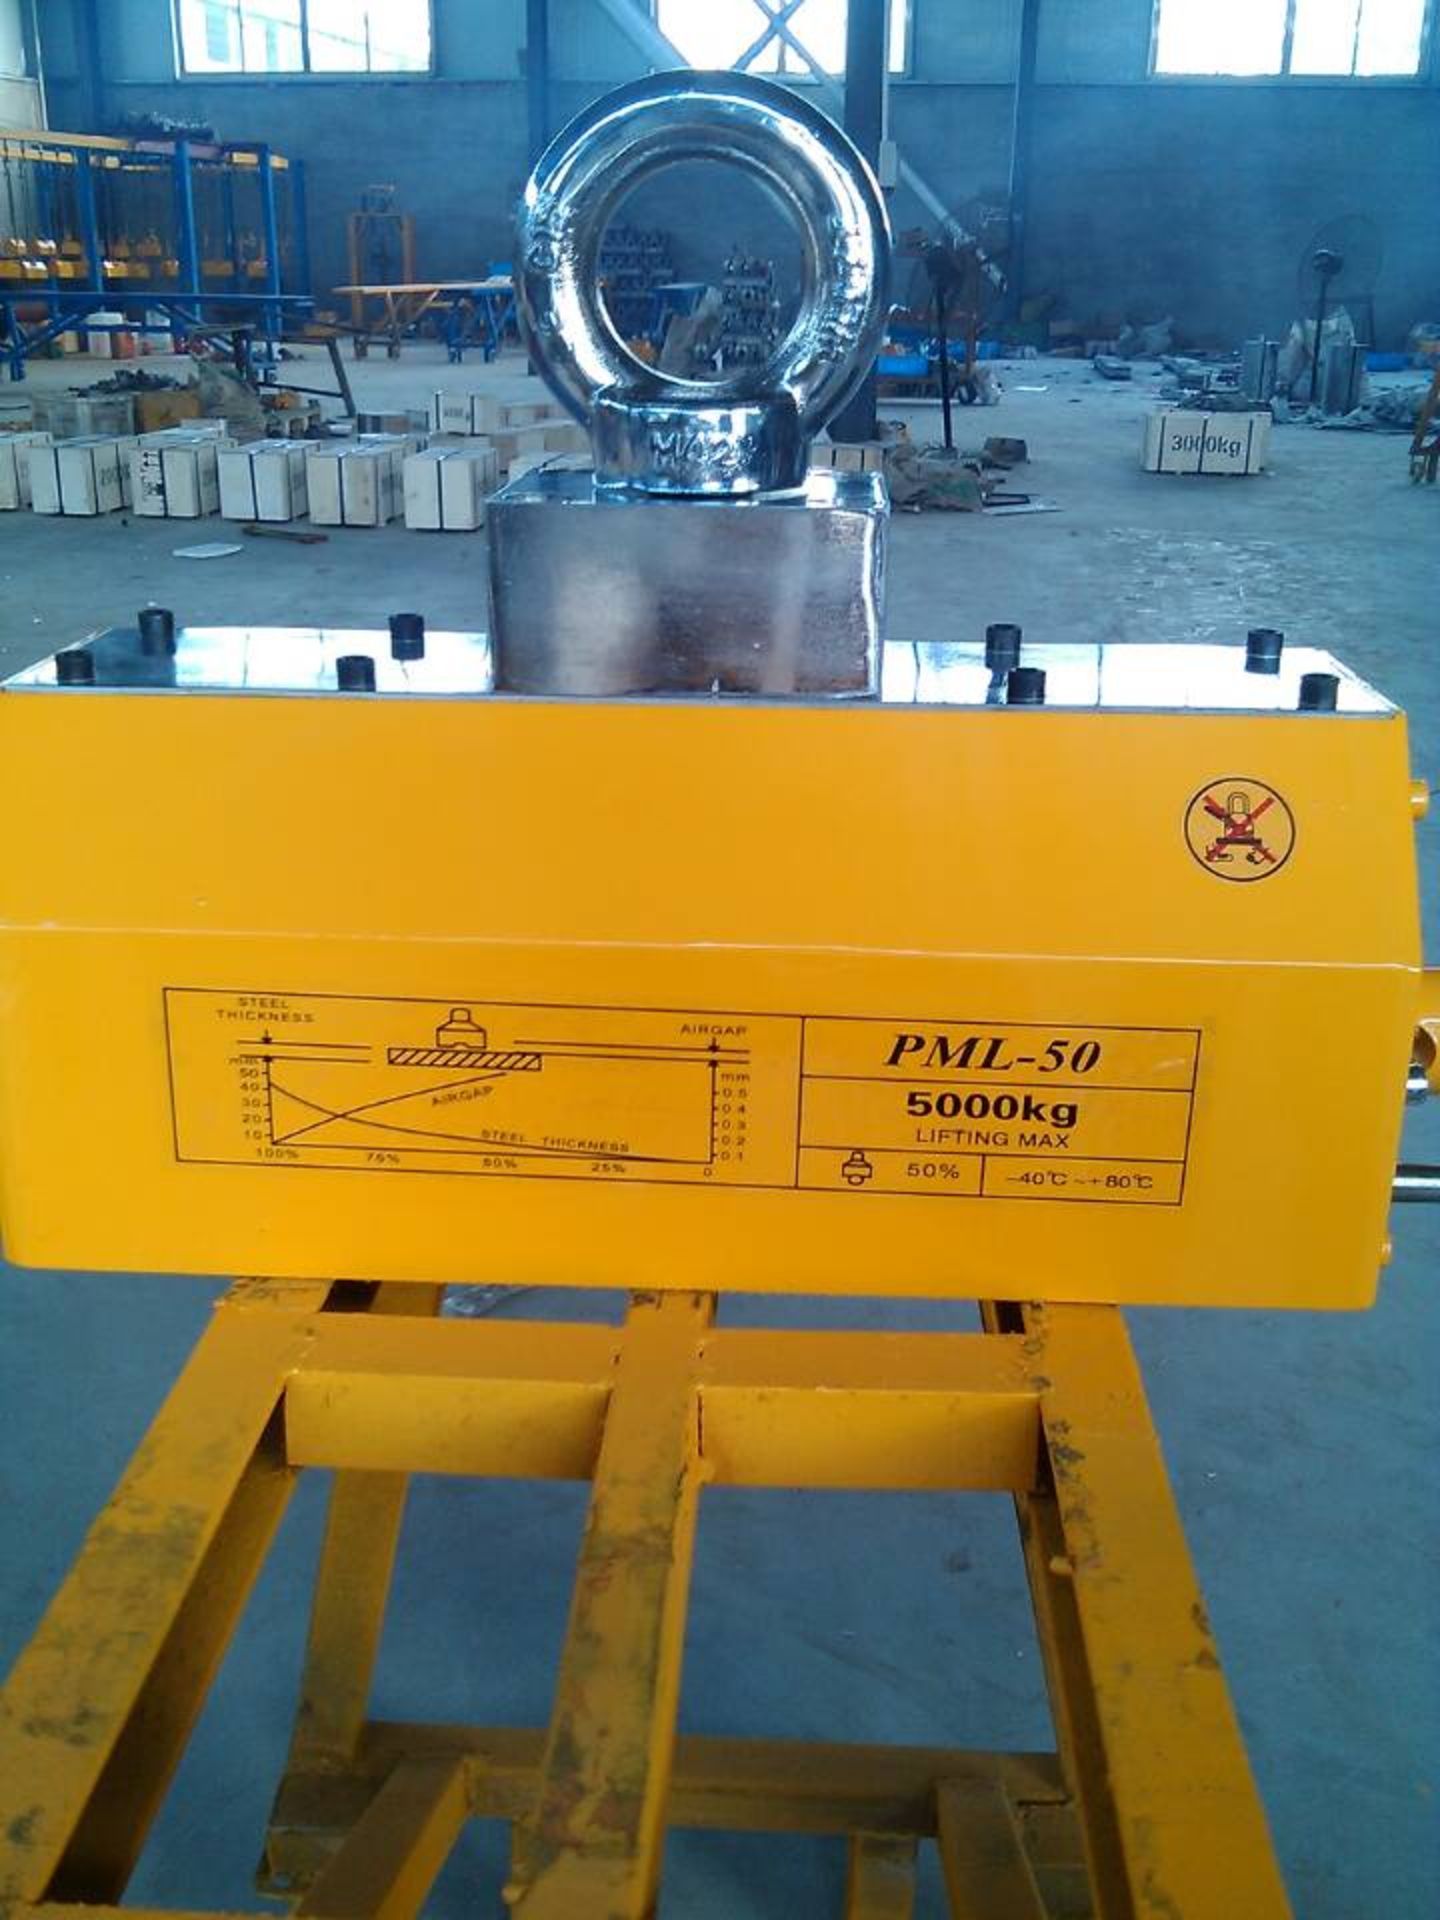 Mint Condition 10,000lbs Plate Lifting Magnet 5 ton unit for plate or pipe